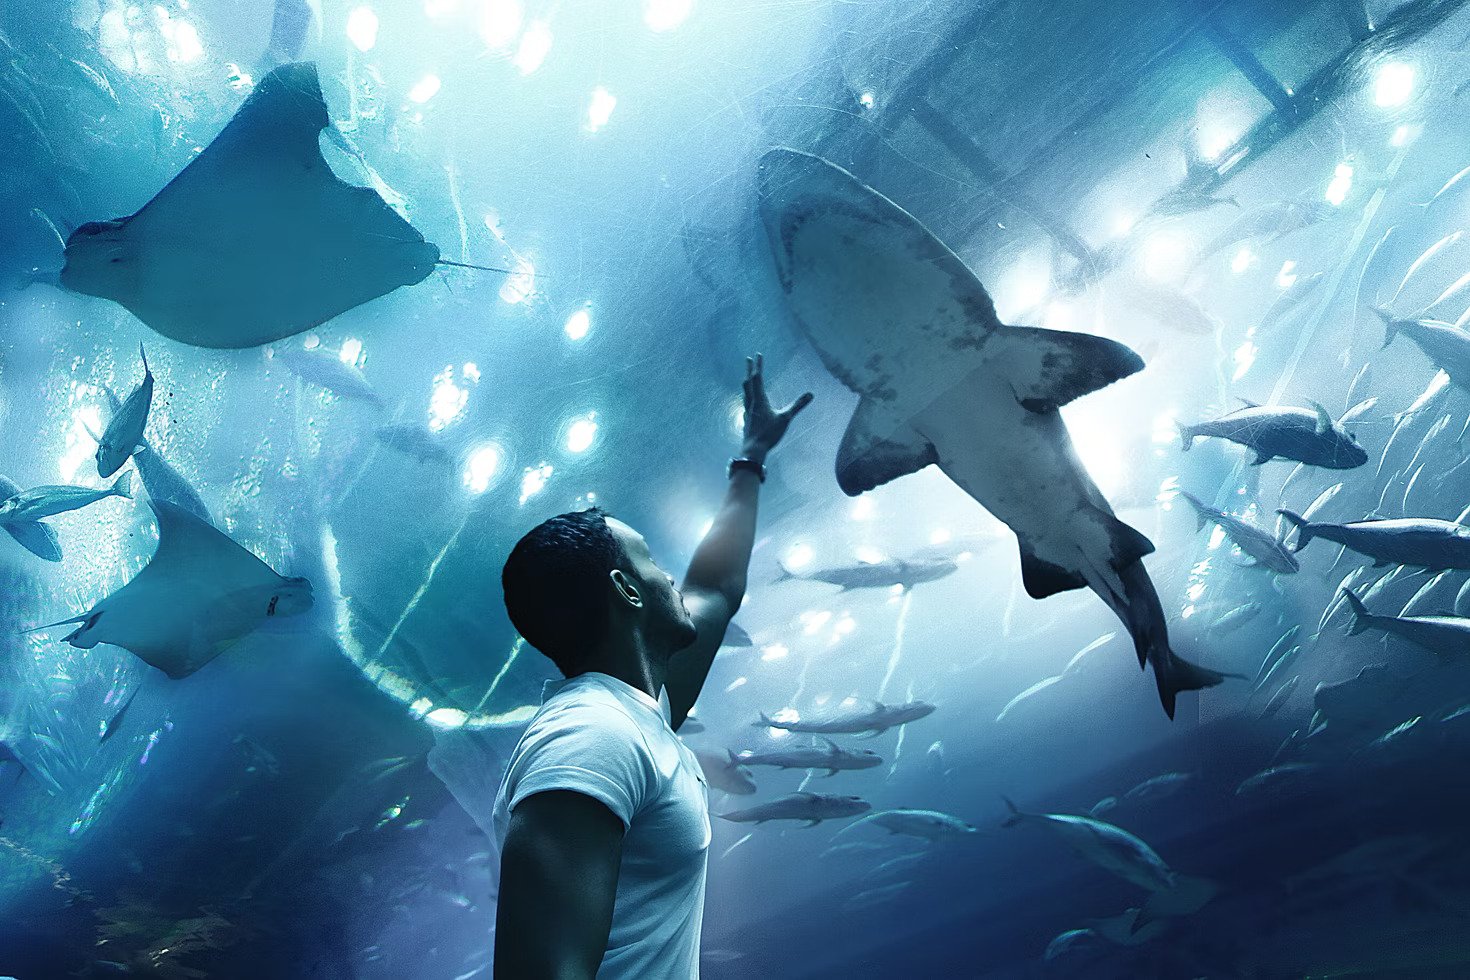 Combo : IMG Worlds of Adventure + The Lost Chambers Aquarium Tickets